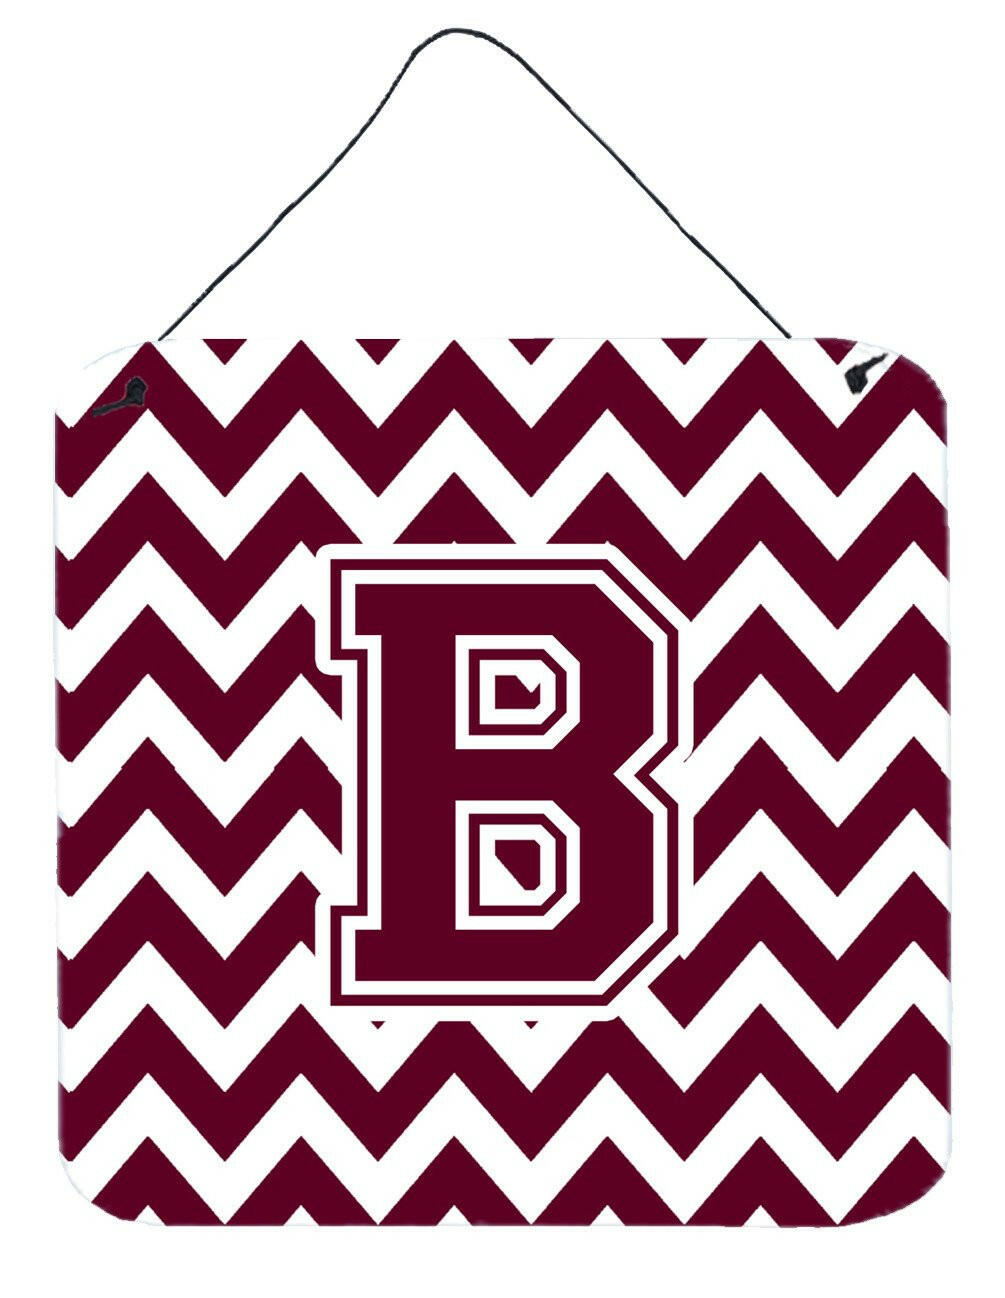 Letter B Chevron Maroon and White  Wall or Door Hanging Prints CJ1051-BDS66 by Caroline's Treasures